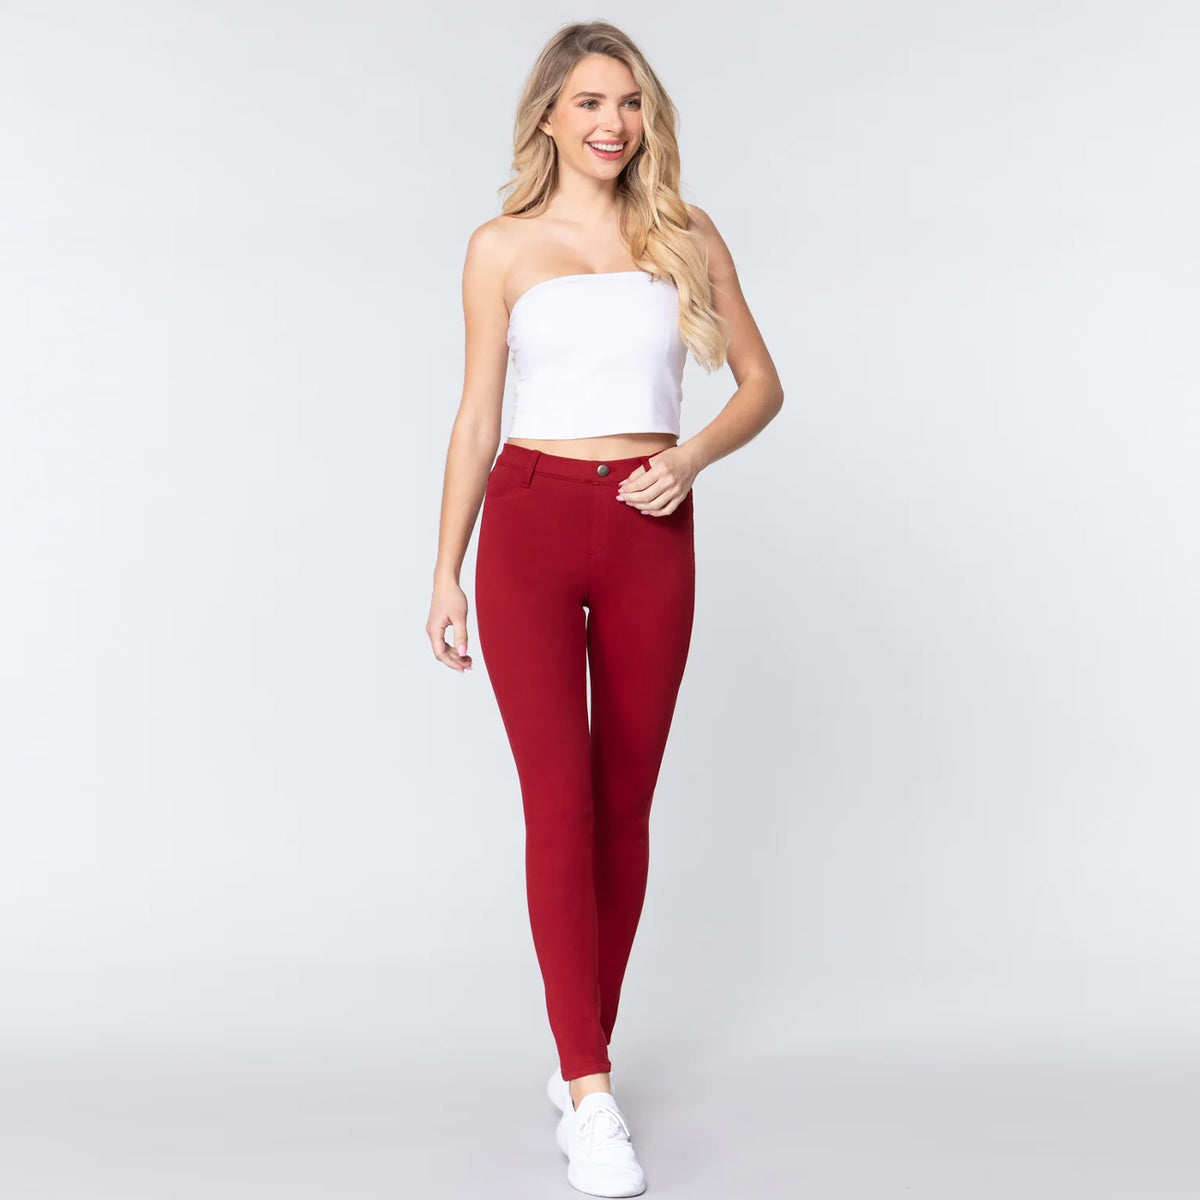 Red Knit Twill Jeggings